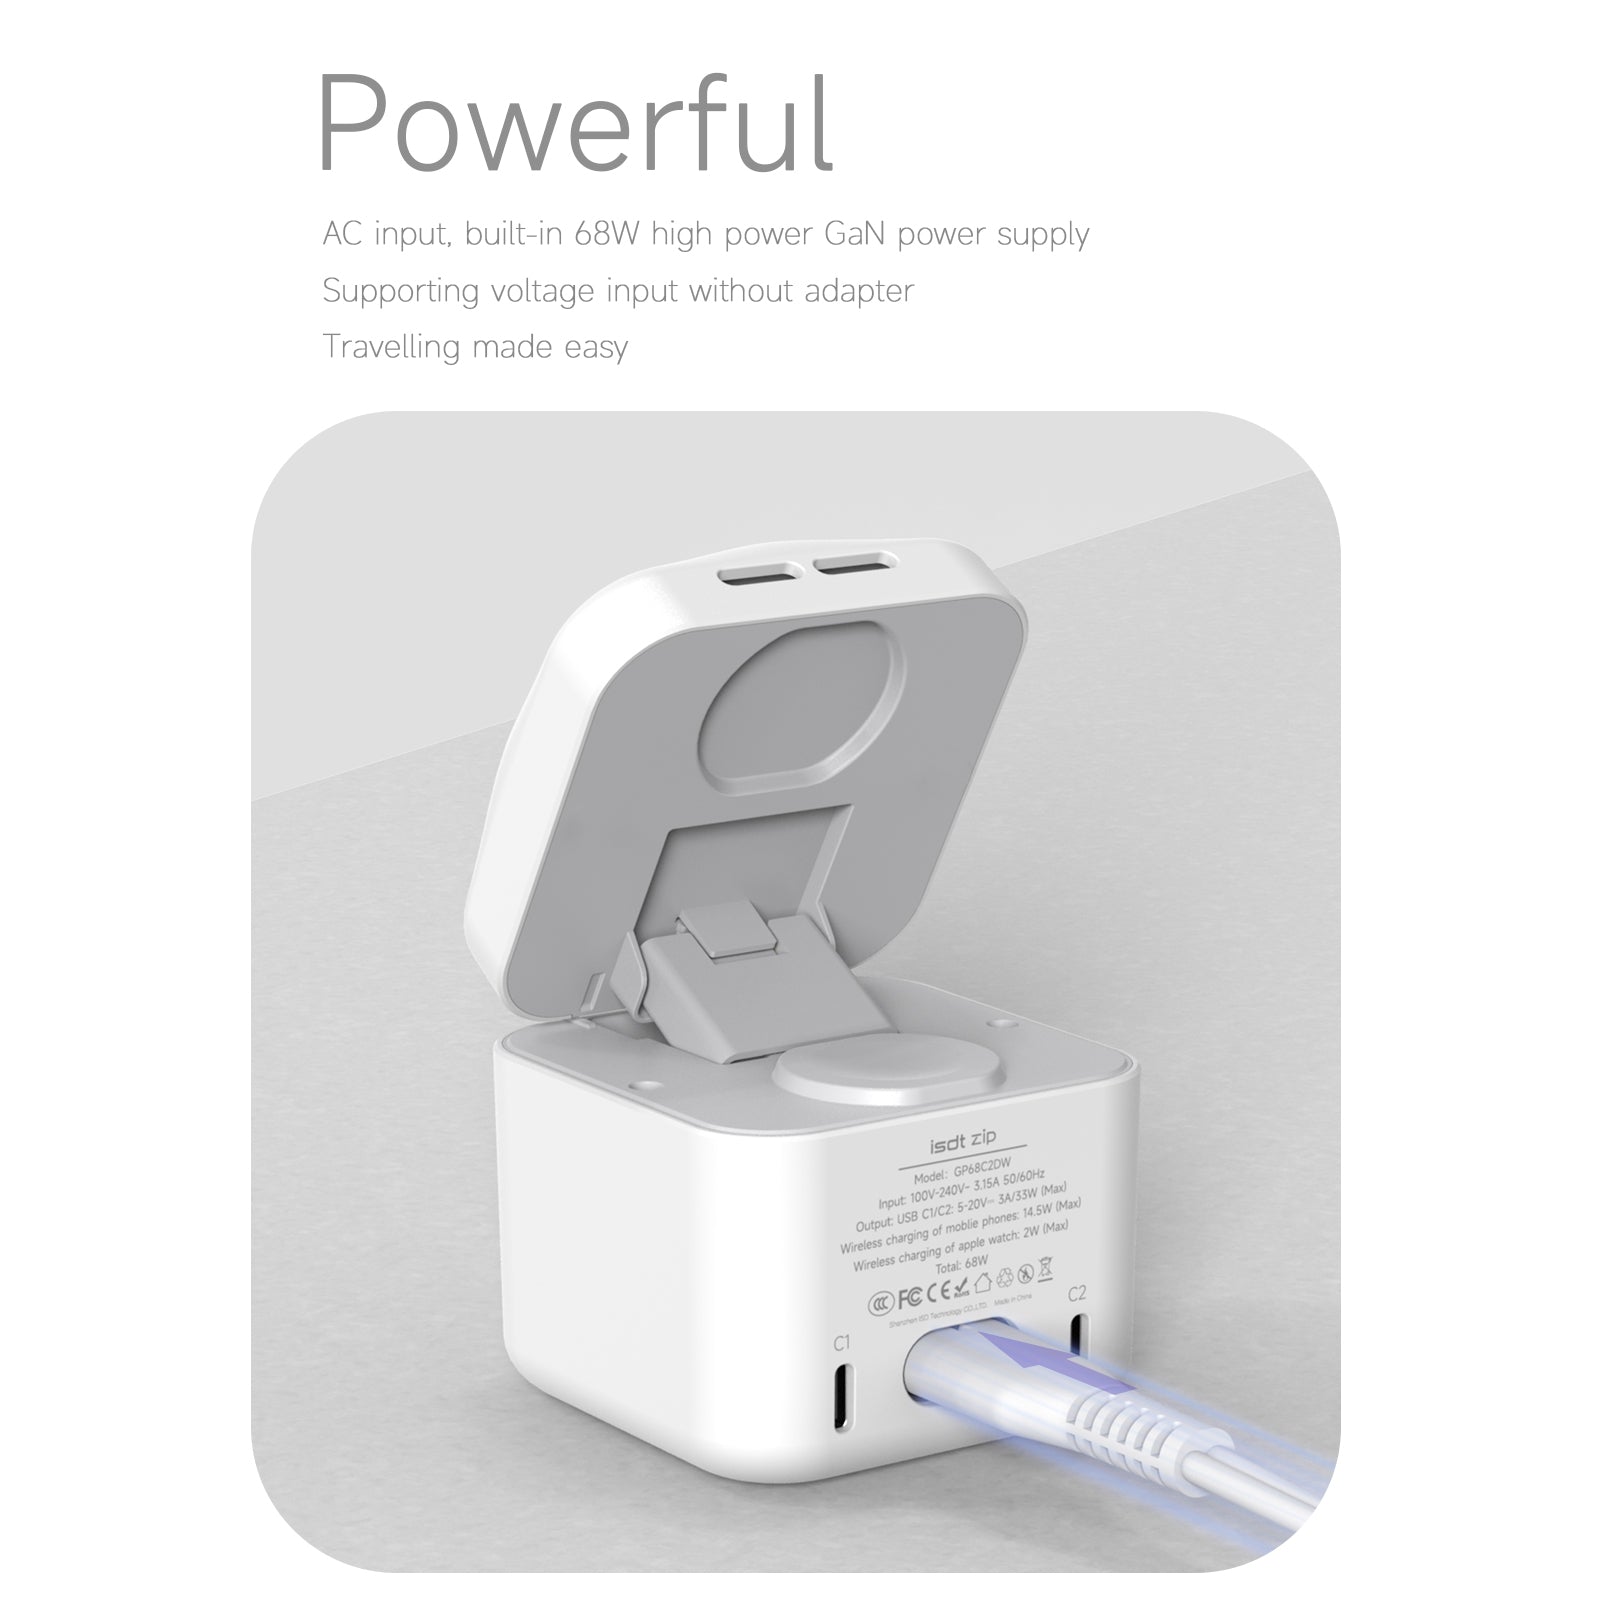 zip Magsafe Charger Stand,3 in 1 Wireless Magsafe Charger with 2x33W USB C  Charge Ports for iPhone/Apple Watch/iPad/iPod,Portable Magsafe Charger for  